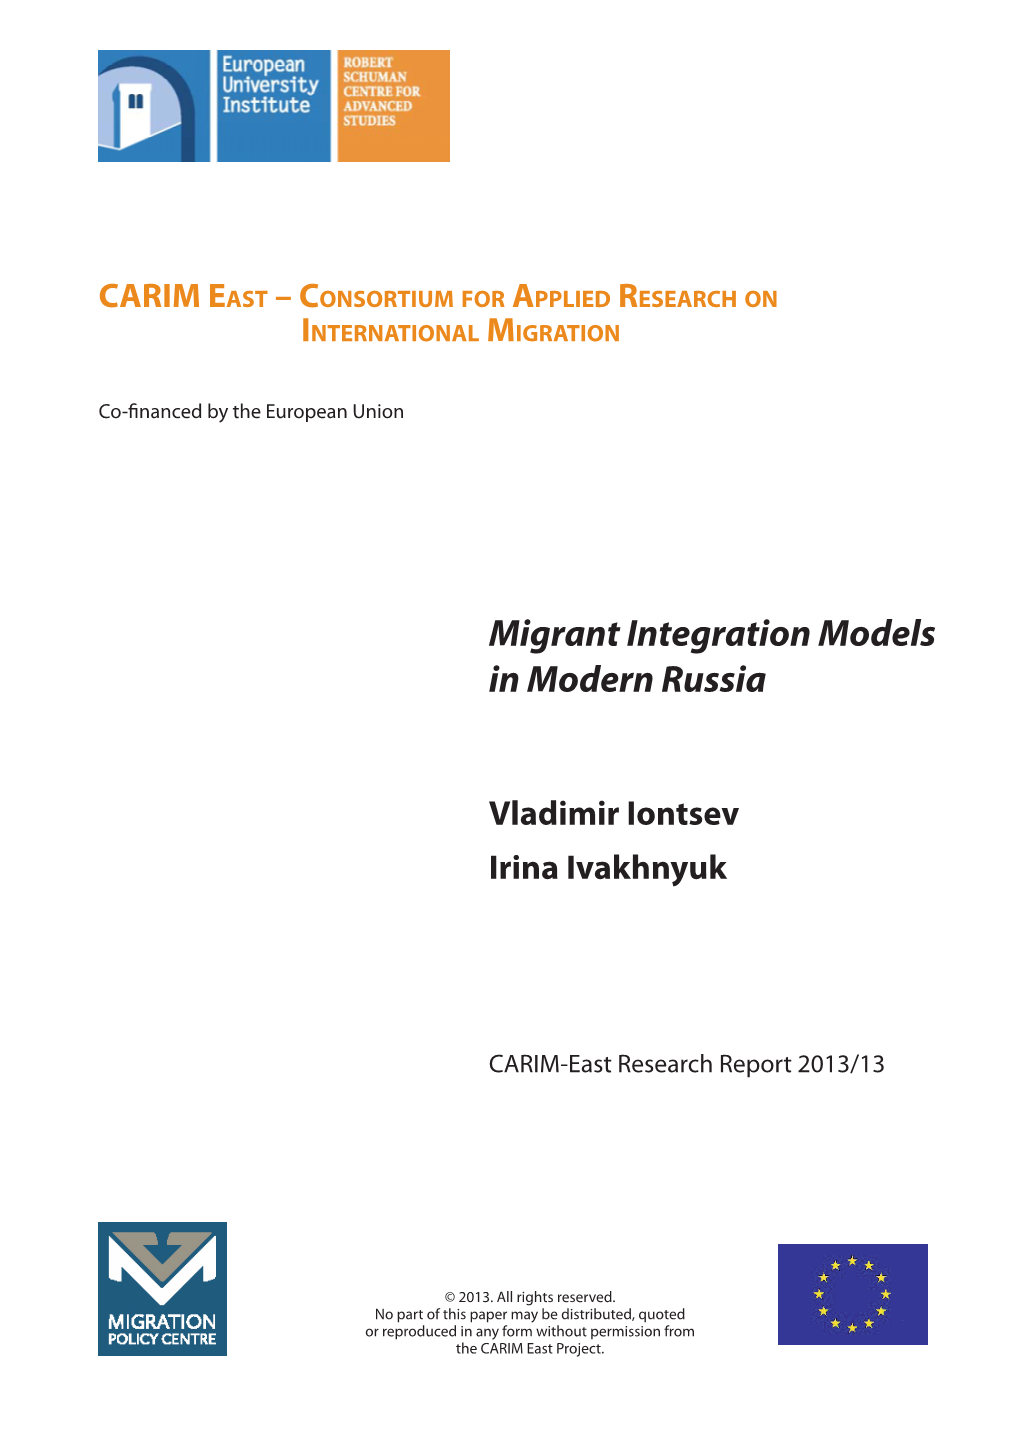 Migrant Integration Models in Modern Russia